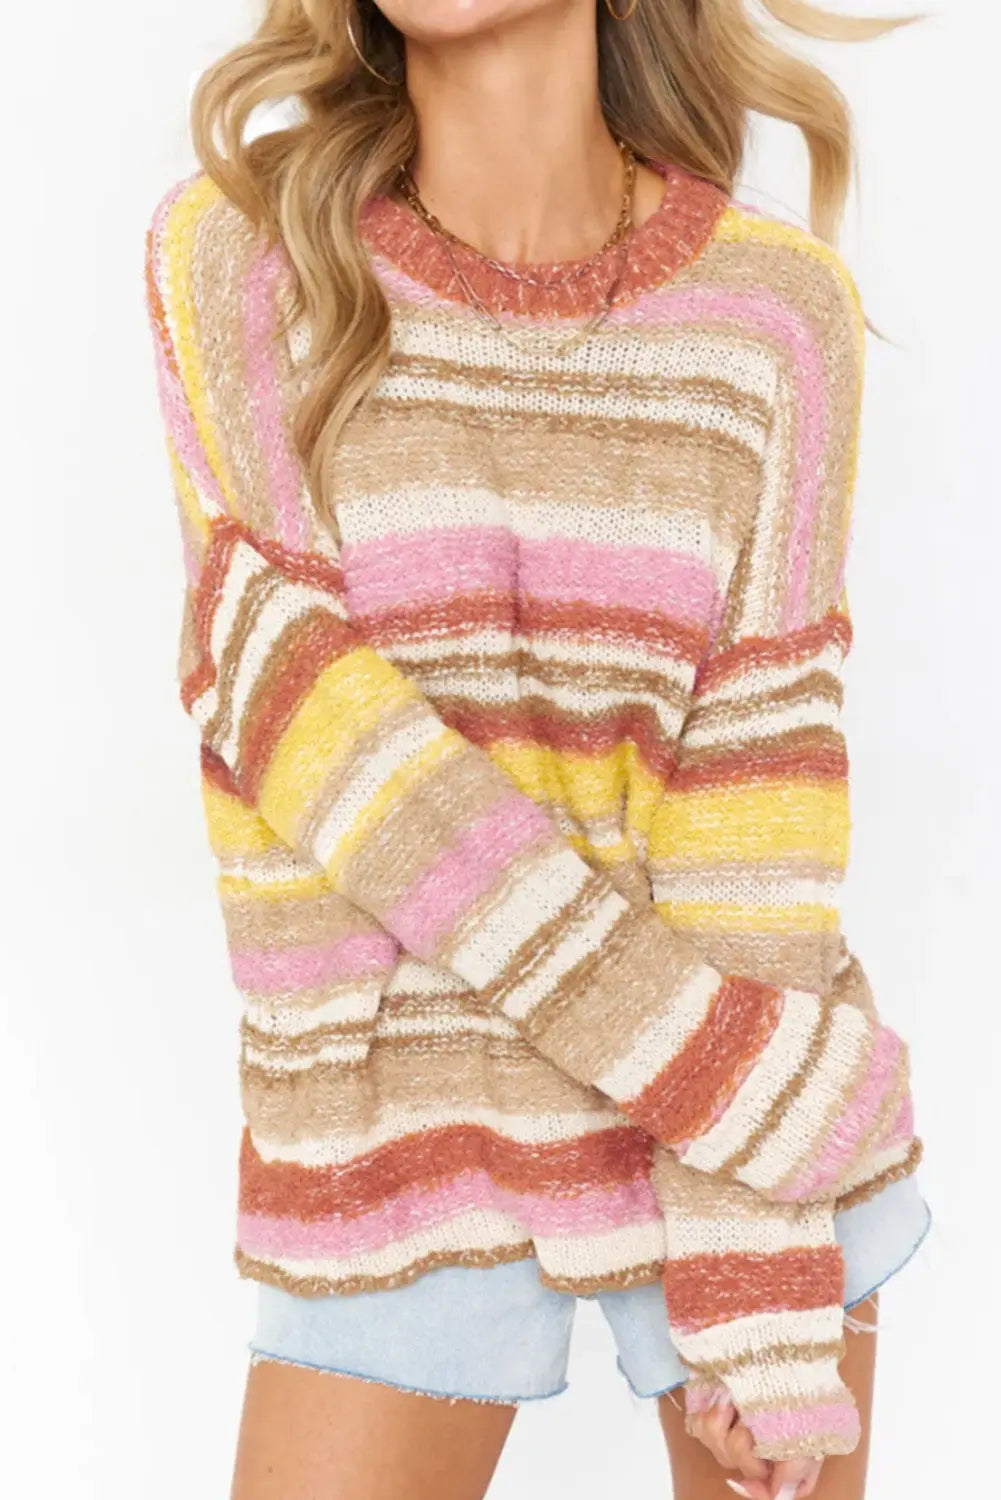 Multicolor striped knit drop shoulder sweater - s / 65% acrylic + 35% polyester - sweaters & cardigans